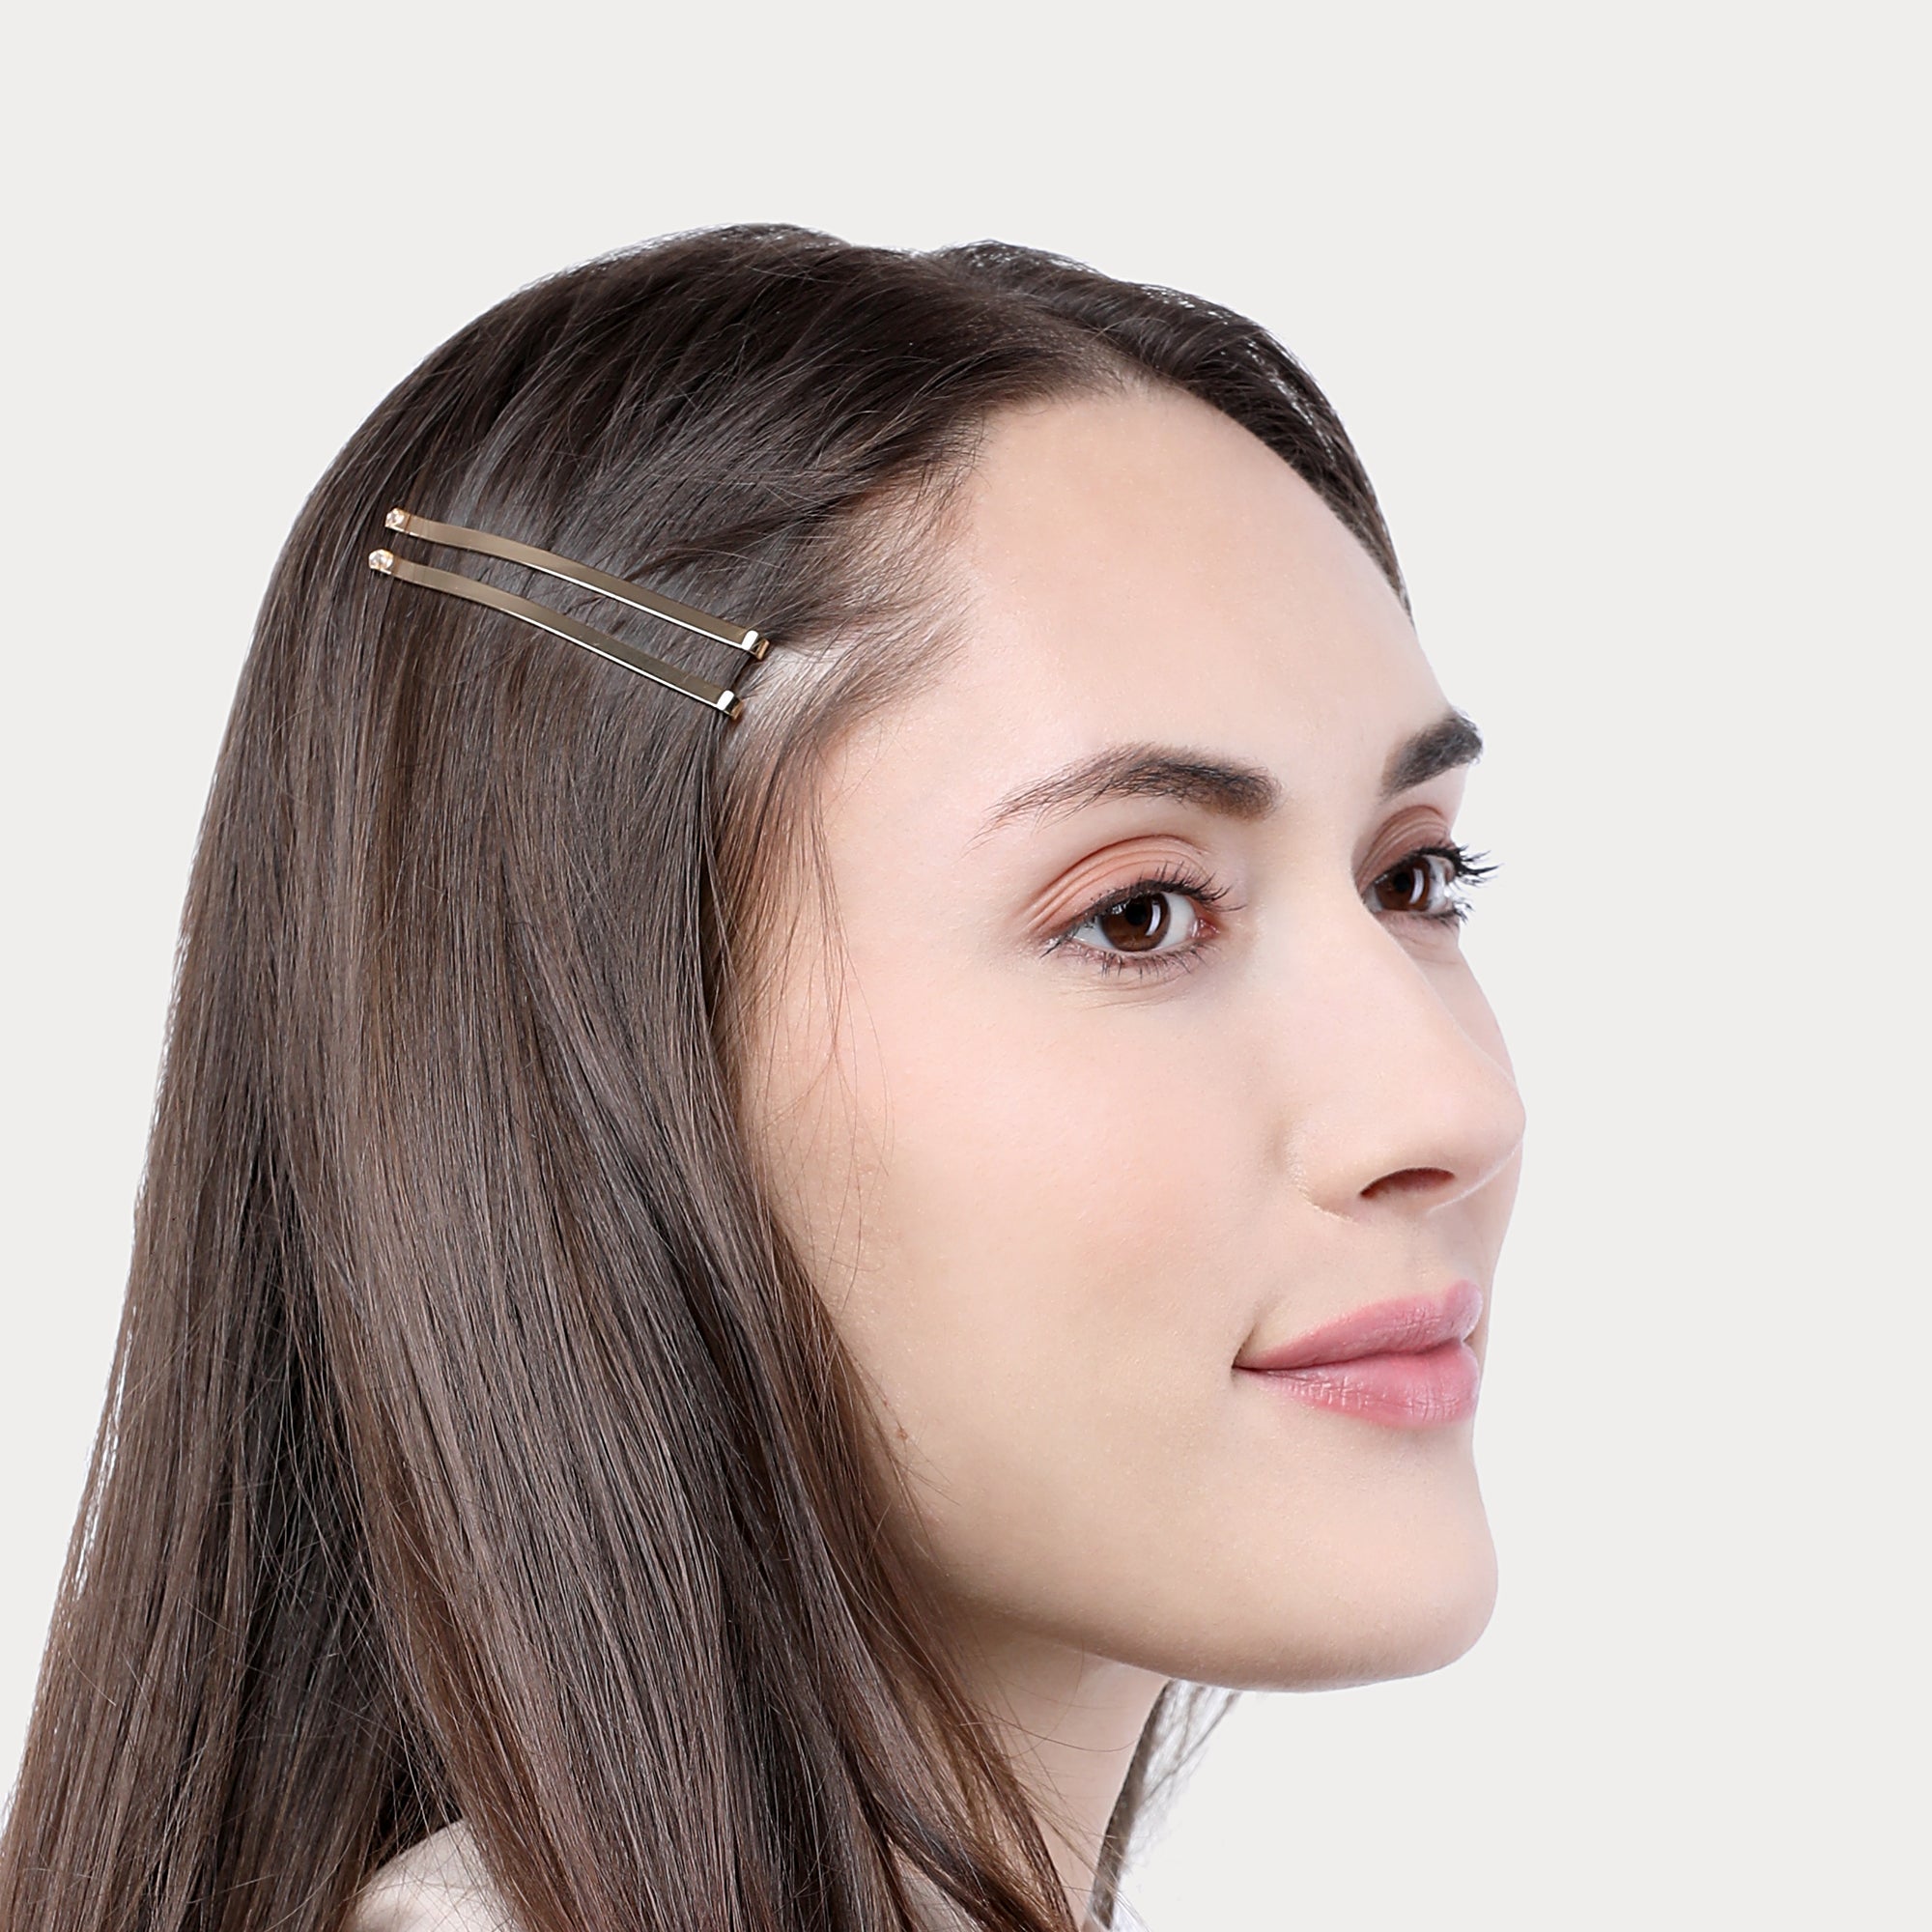 Accessorize London Pack Of 4 Long Metal Grip Hair Clips